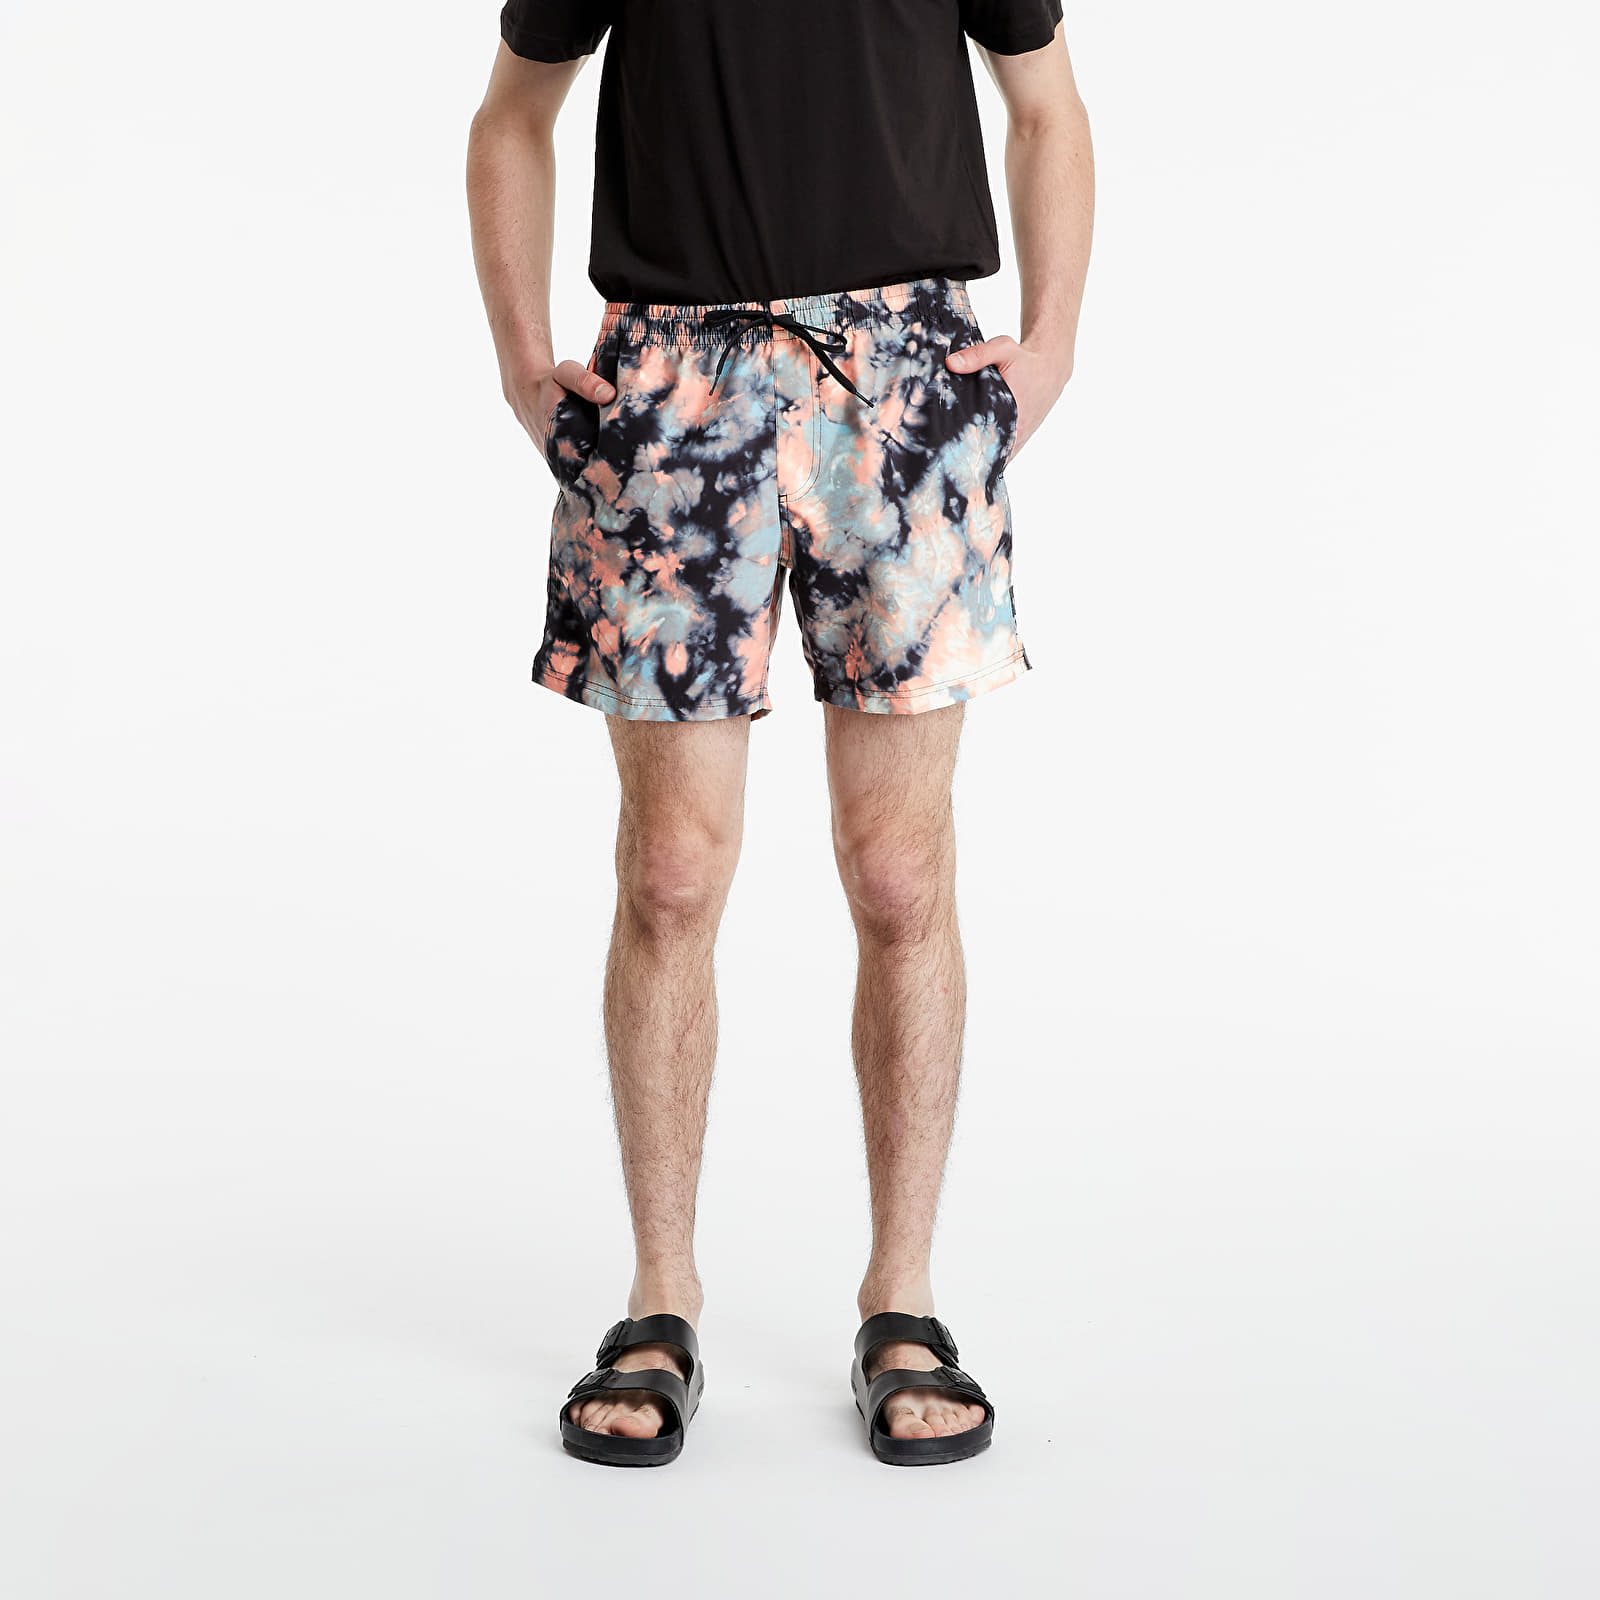 swimming trunks for athletic figure